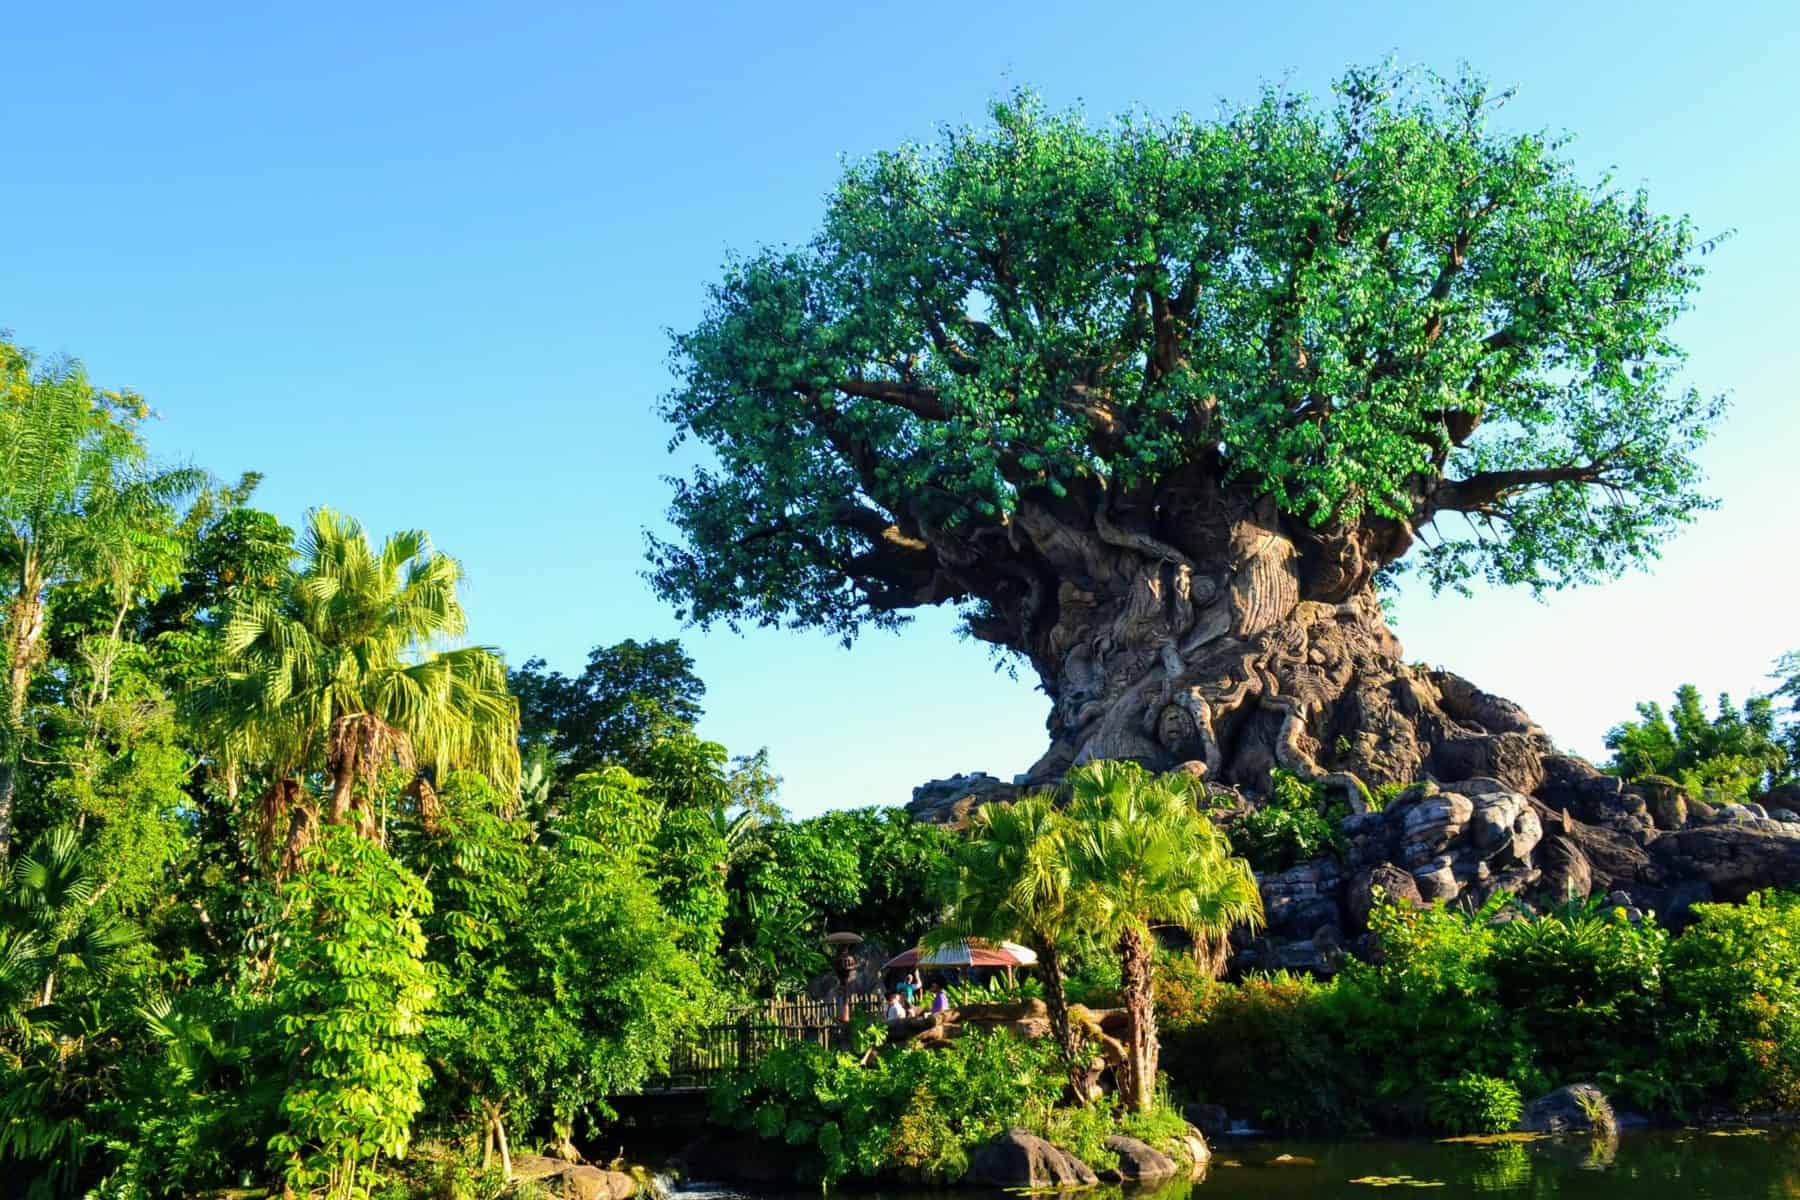 Guide to Animal Kingdom Park Hours in 2022